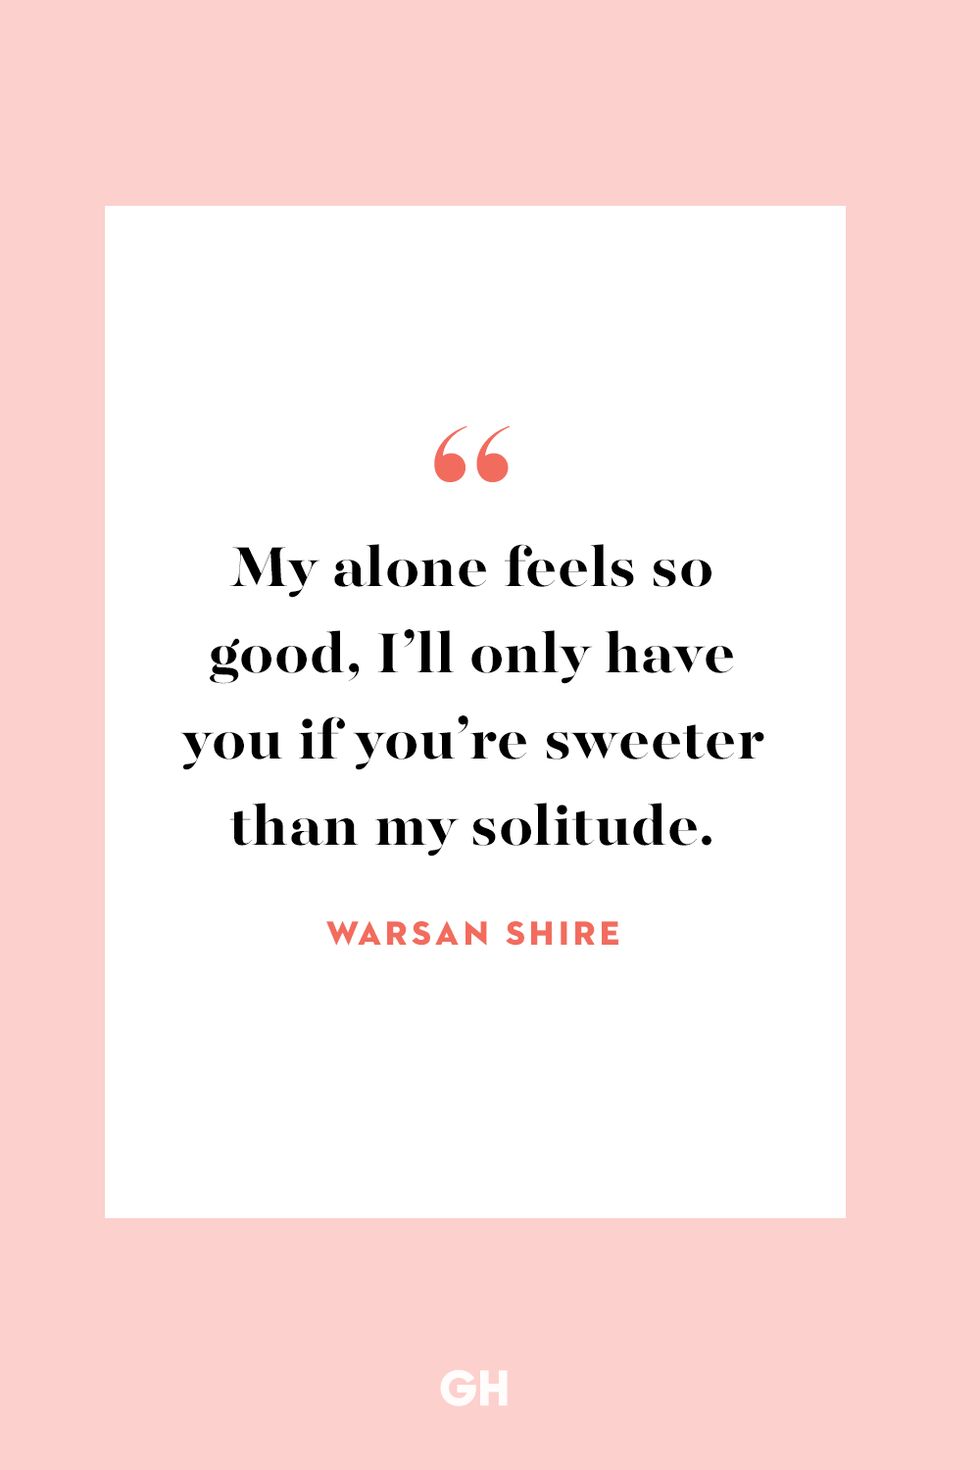 52 Best Being Single Quotes - Powerful Sayings for Single People